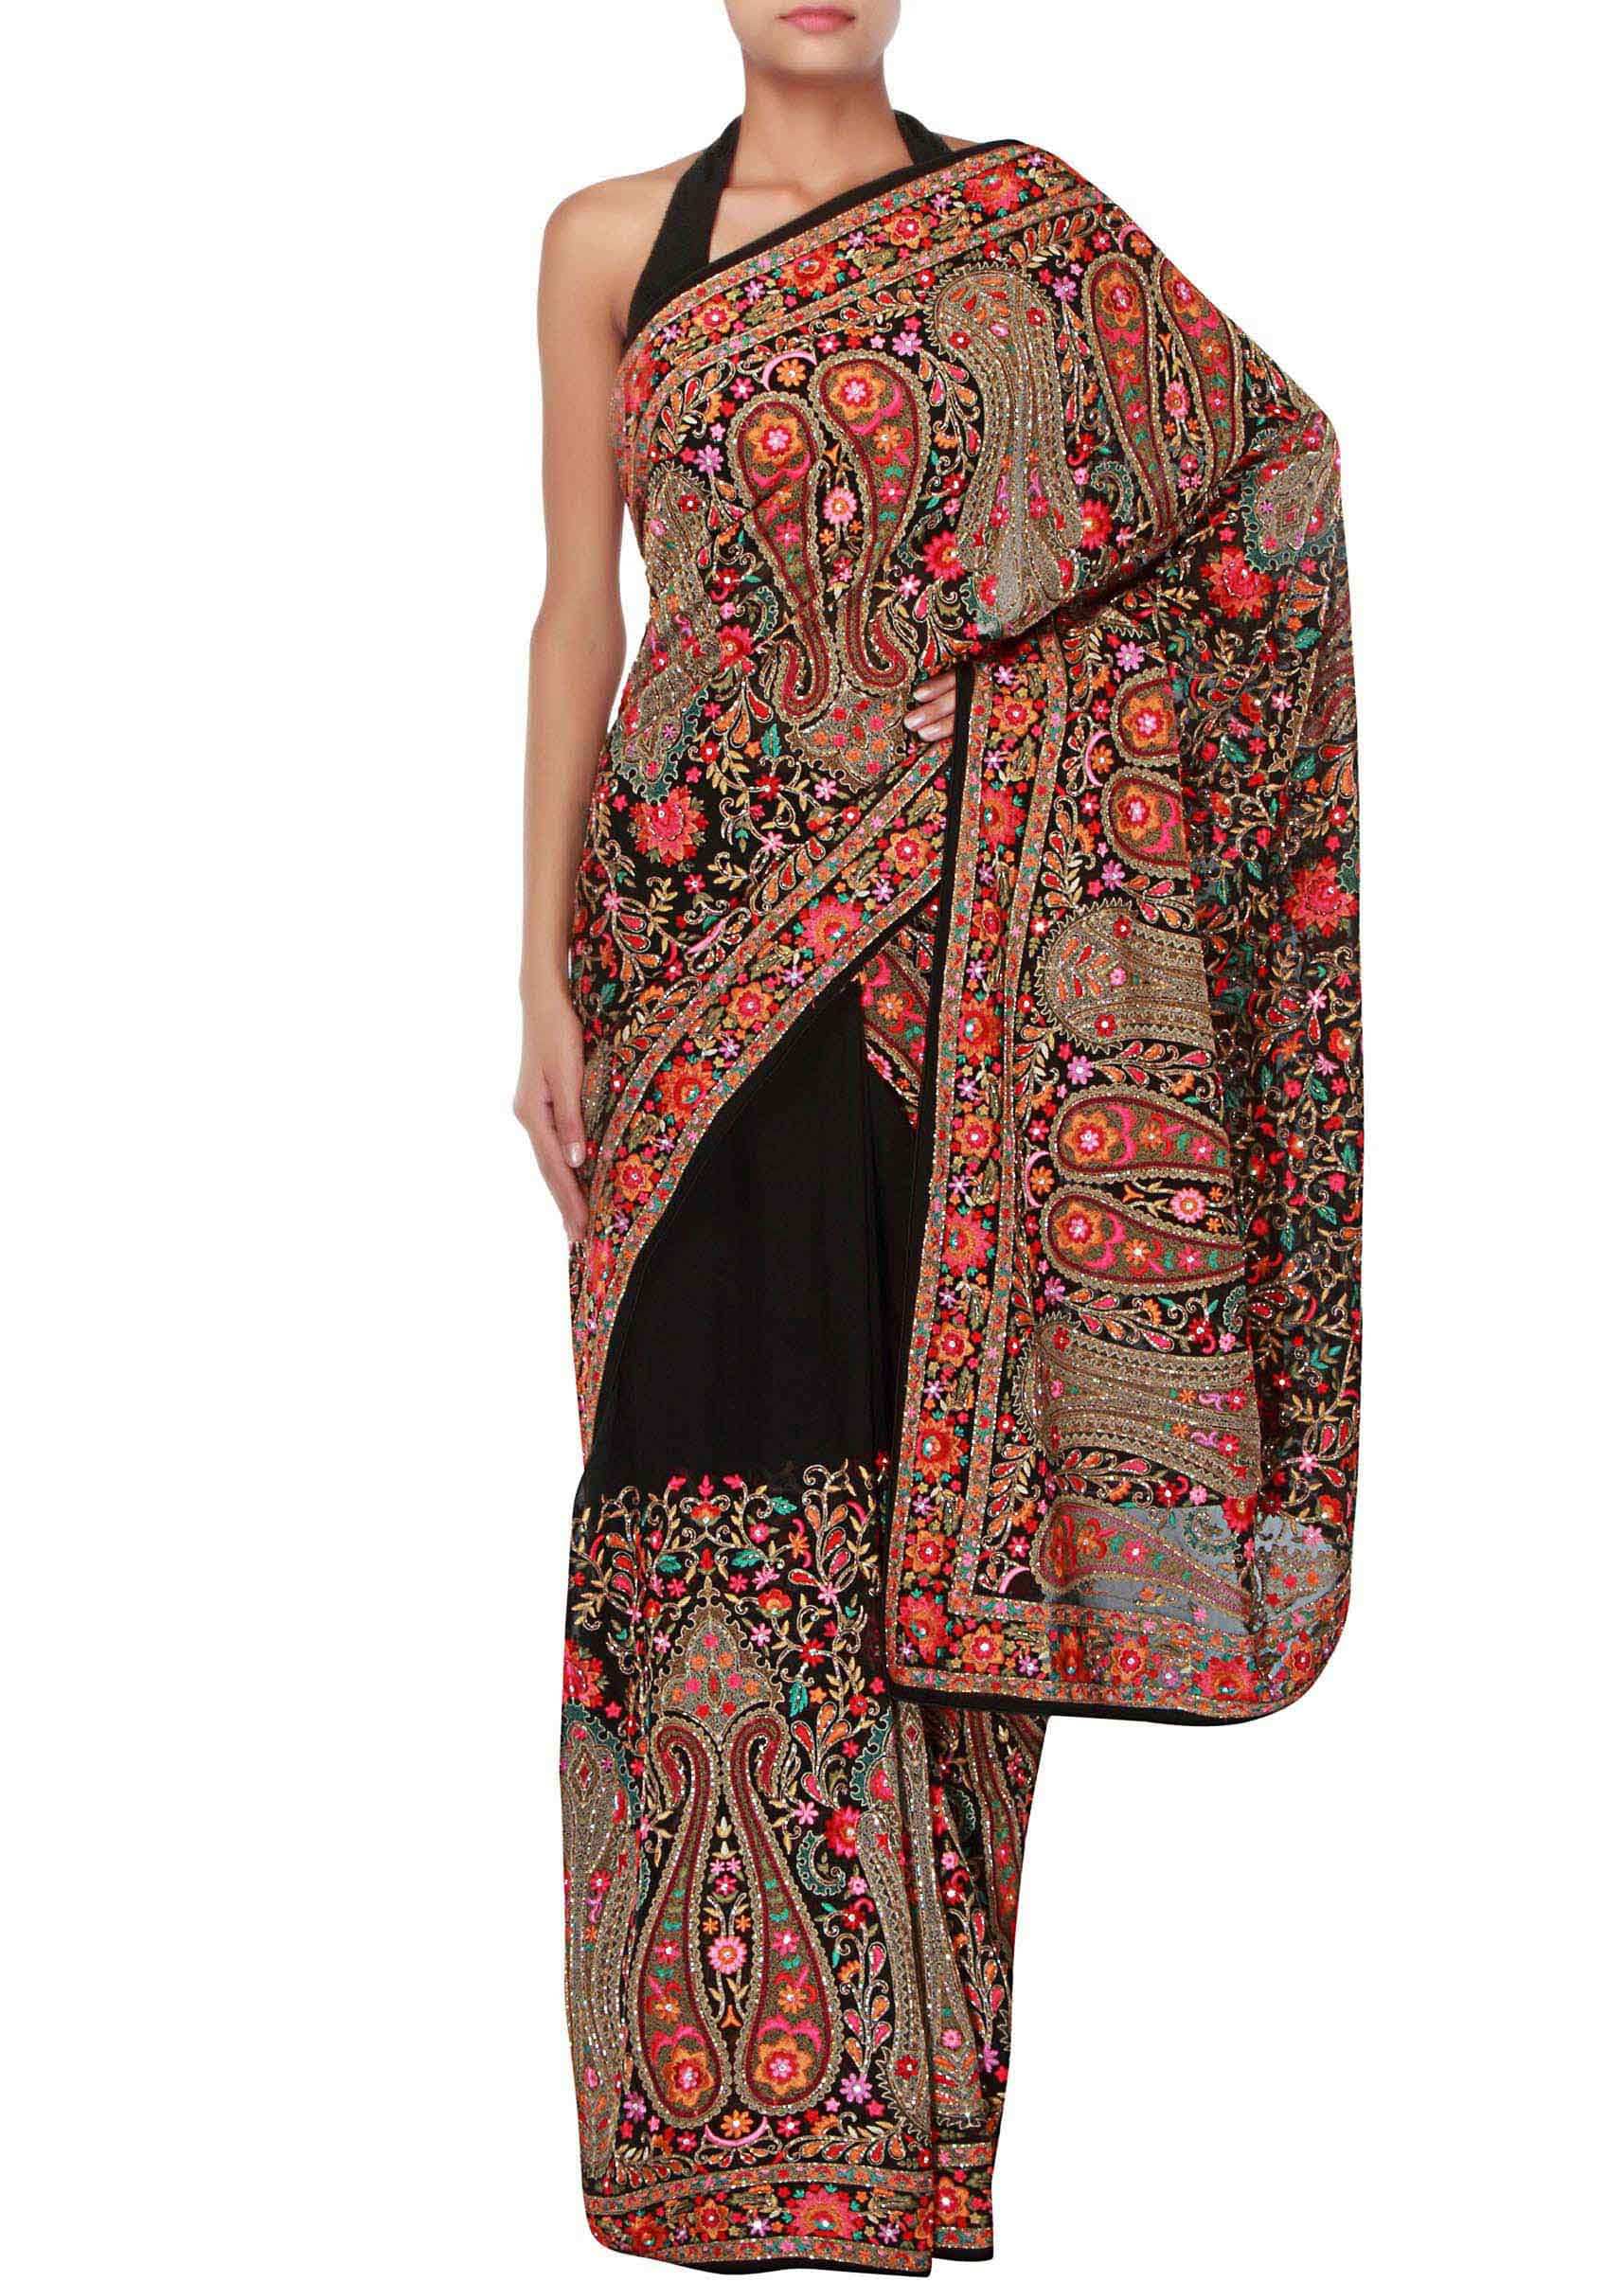 Glorious georgette saree embellished in colourful embroidery only on Kalki